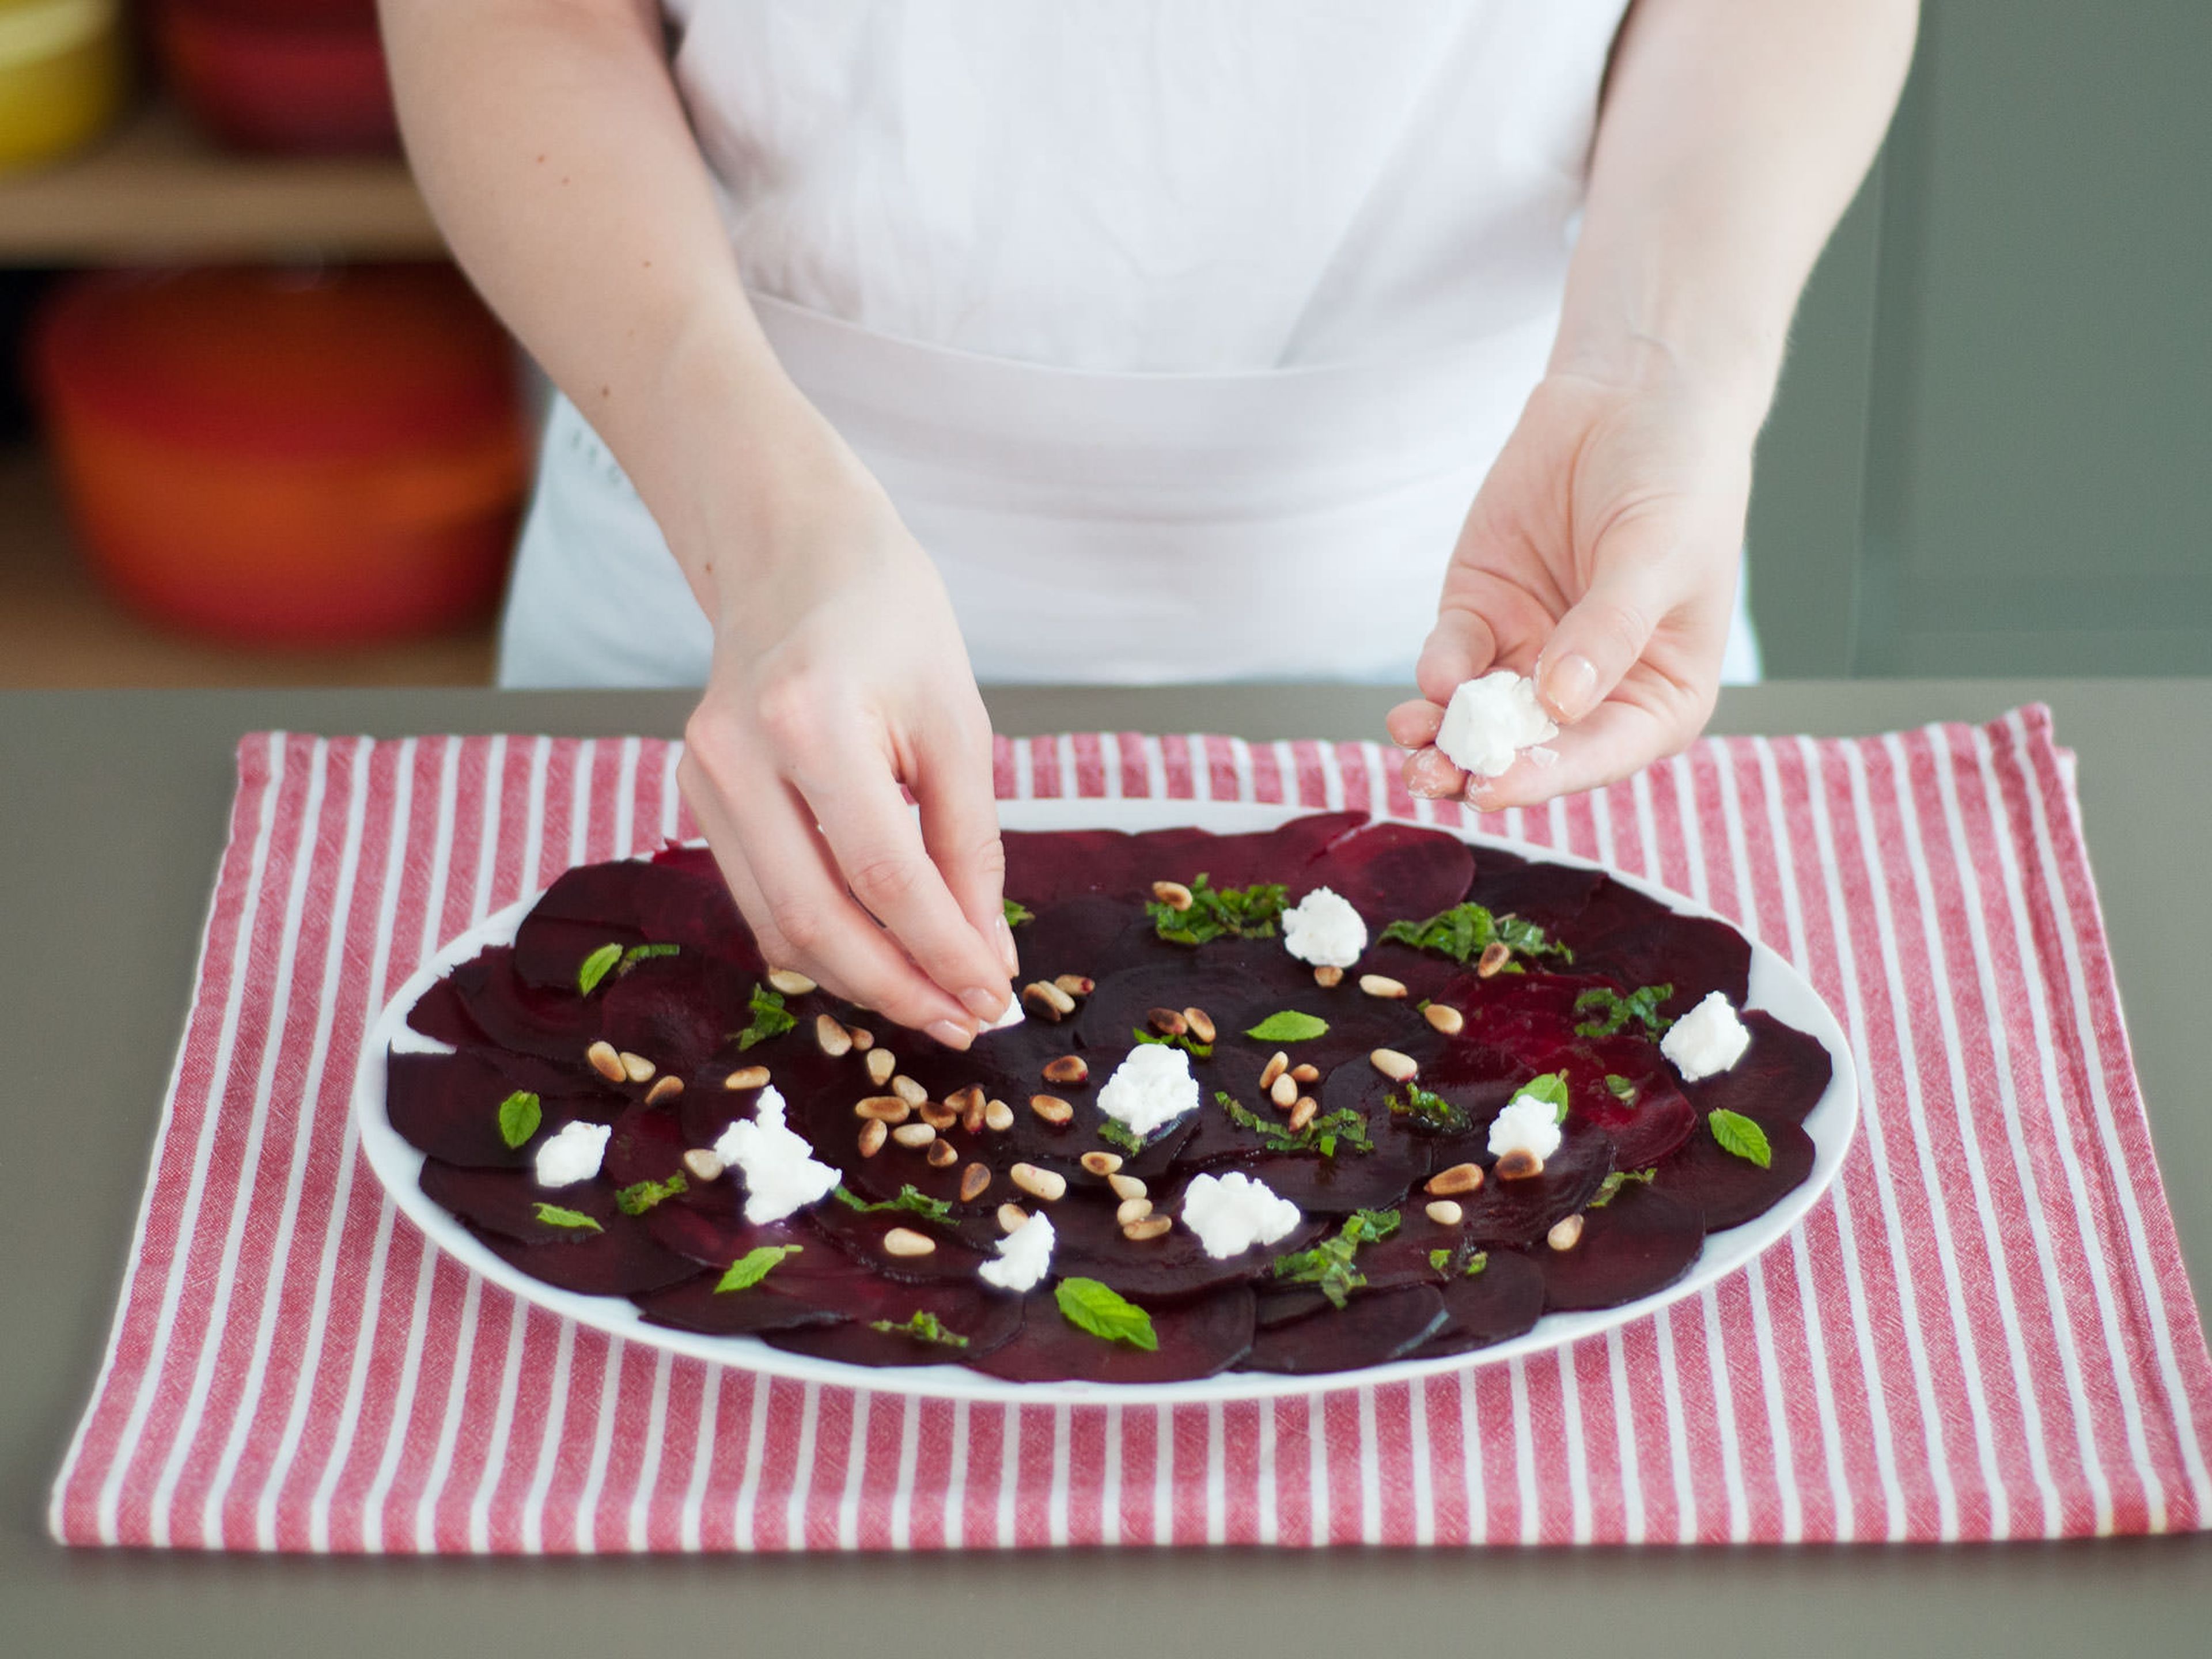 Arrange beets in an even layer on a plate. Pour vinaigrette over beets, add salt and pepper to taste, and garnish with pine nuts, goat cheese, and remaining mint leaves. Enjoy!